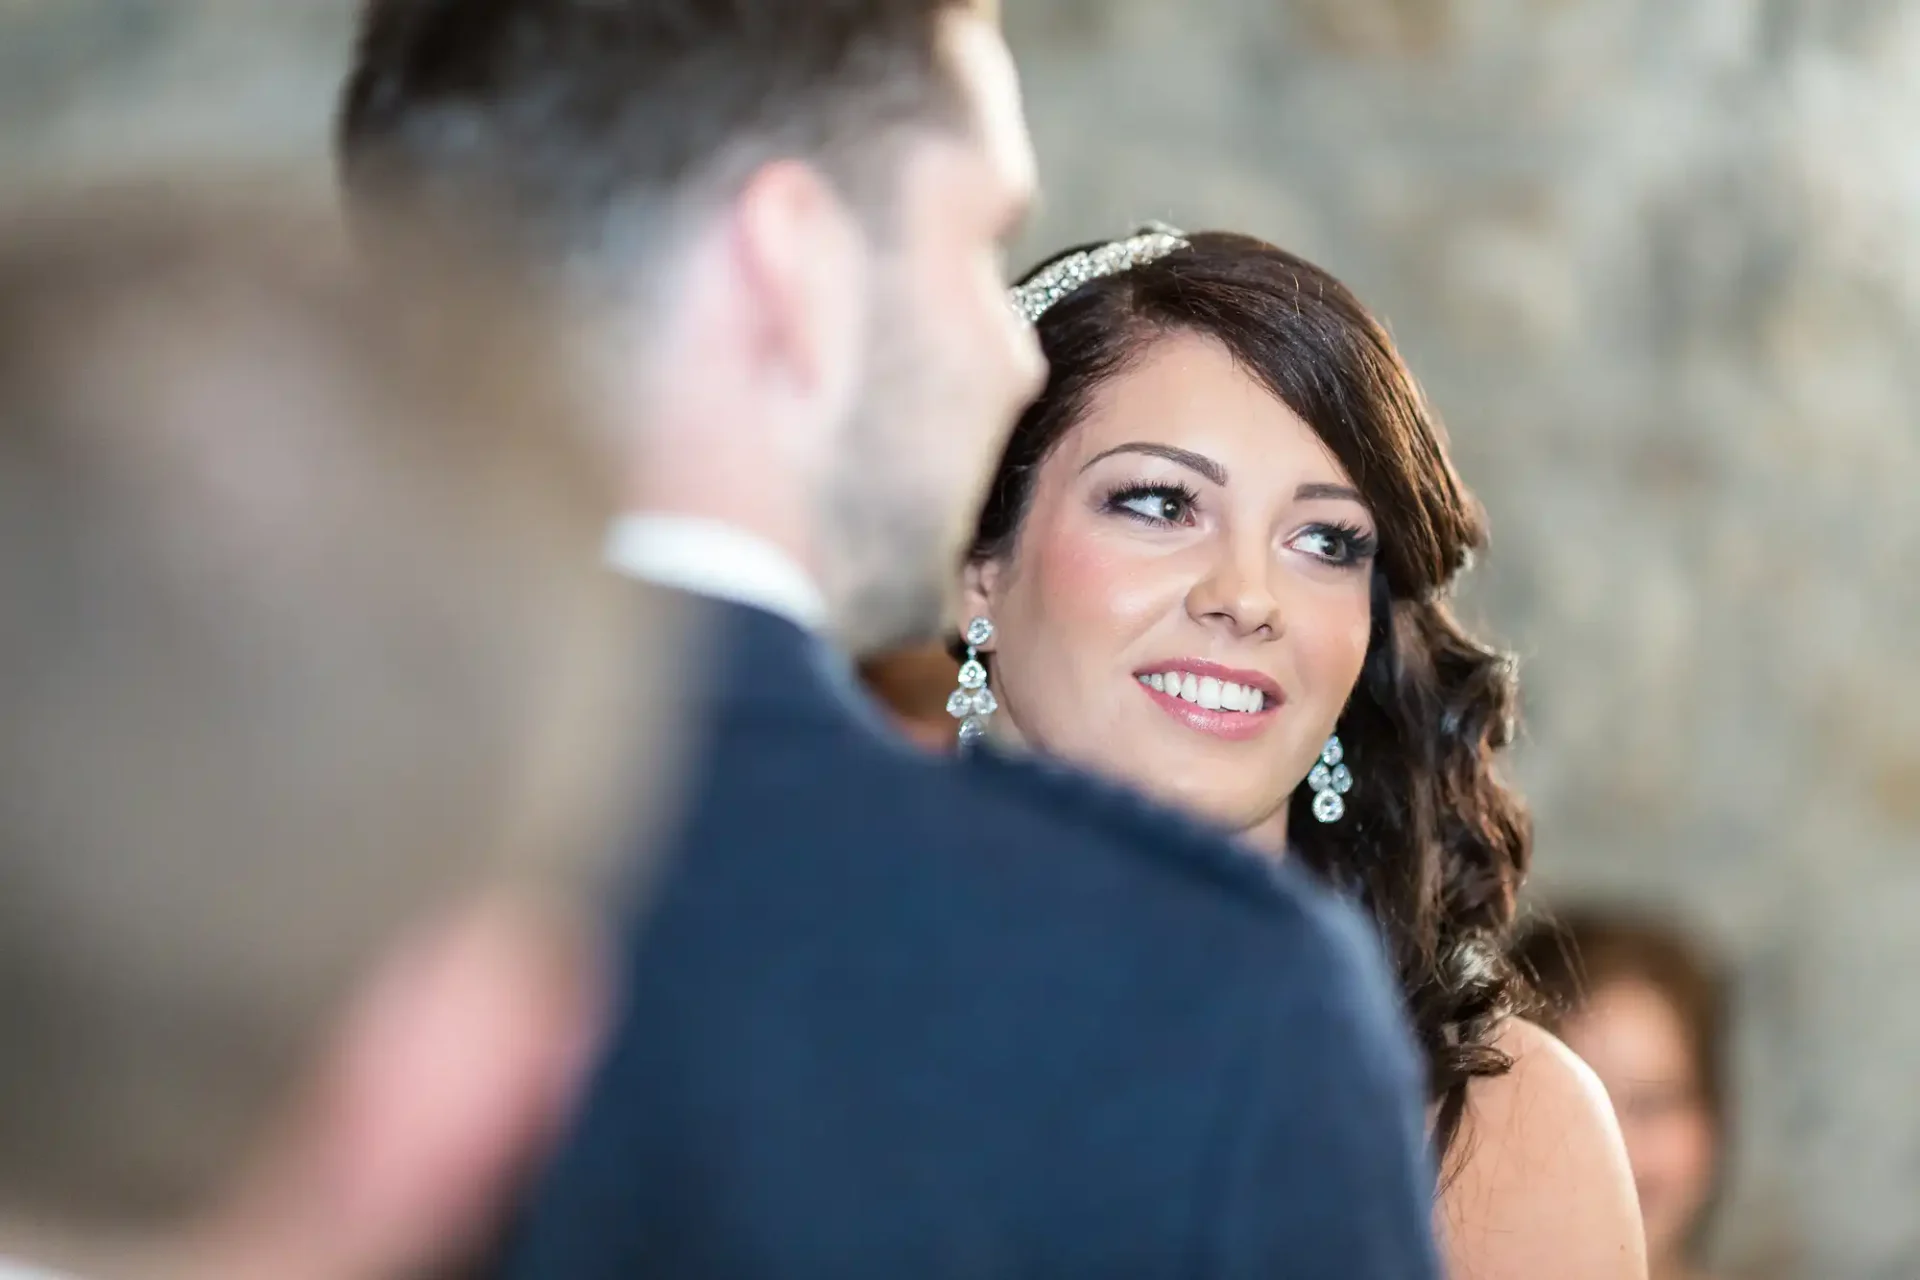 A bride in a tiara smiles at a groom, who is seen from behind, during a wedding ceremony.